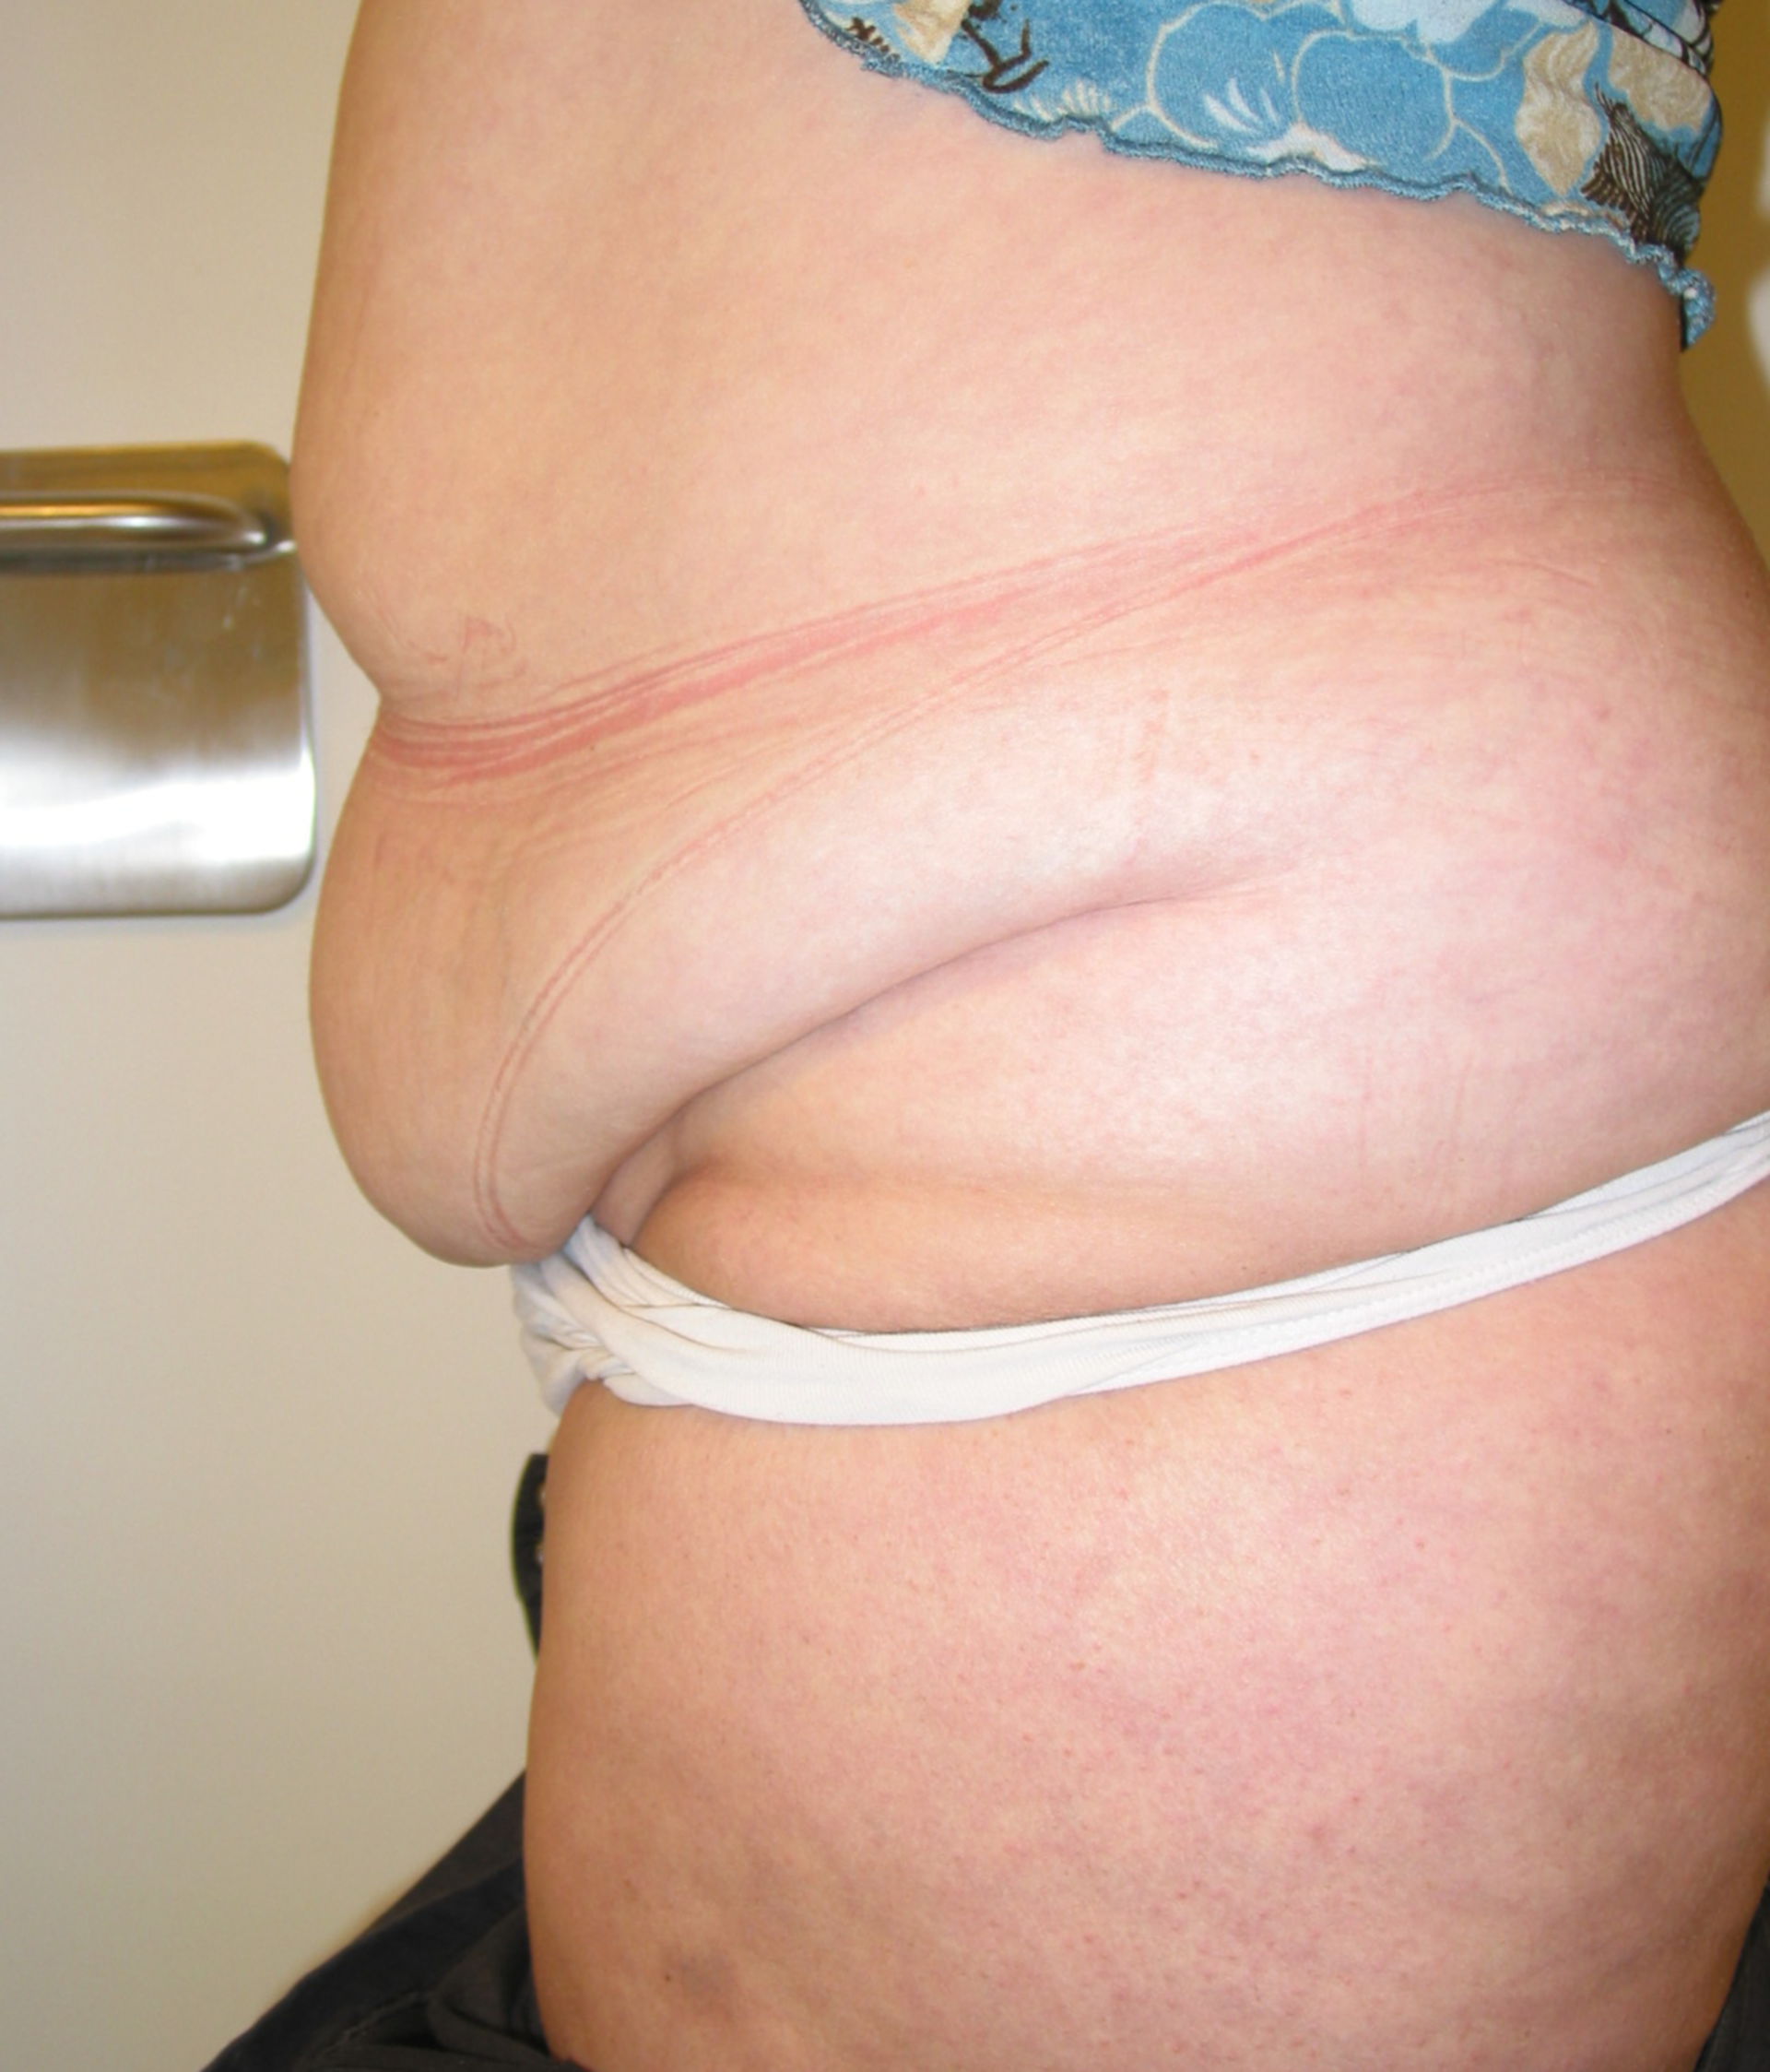 Adipose patient after weight loss